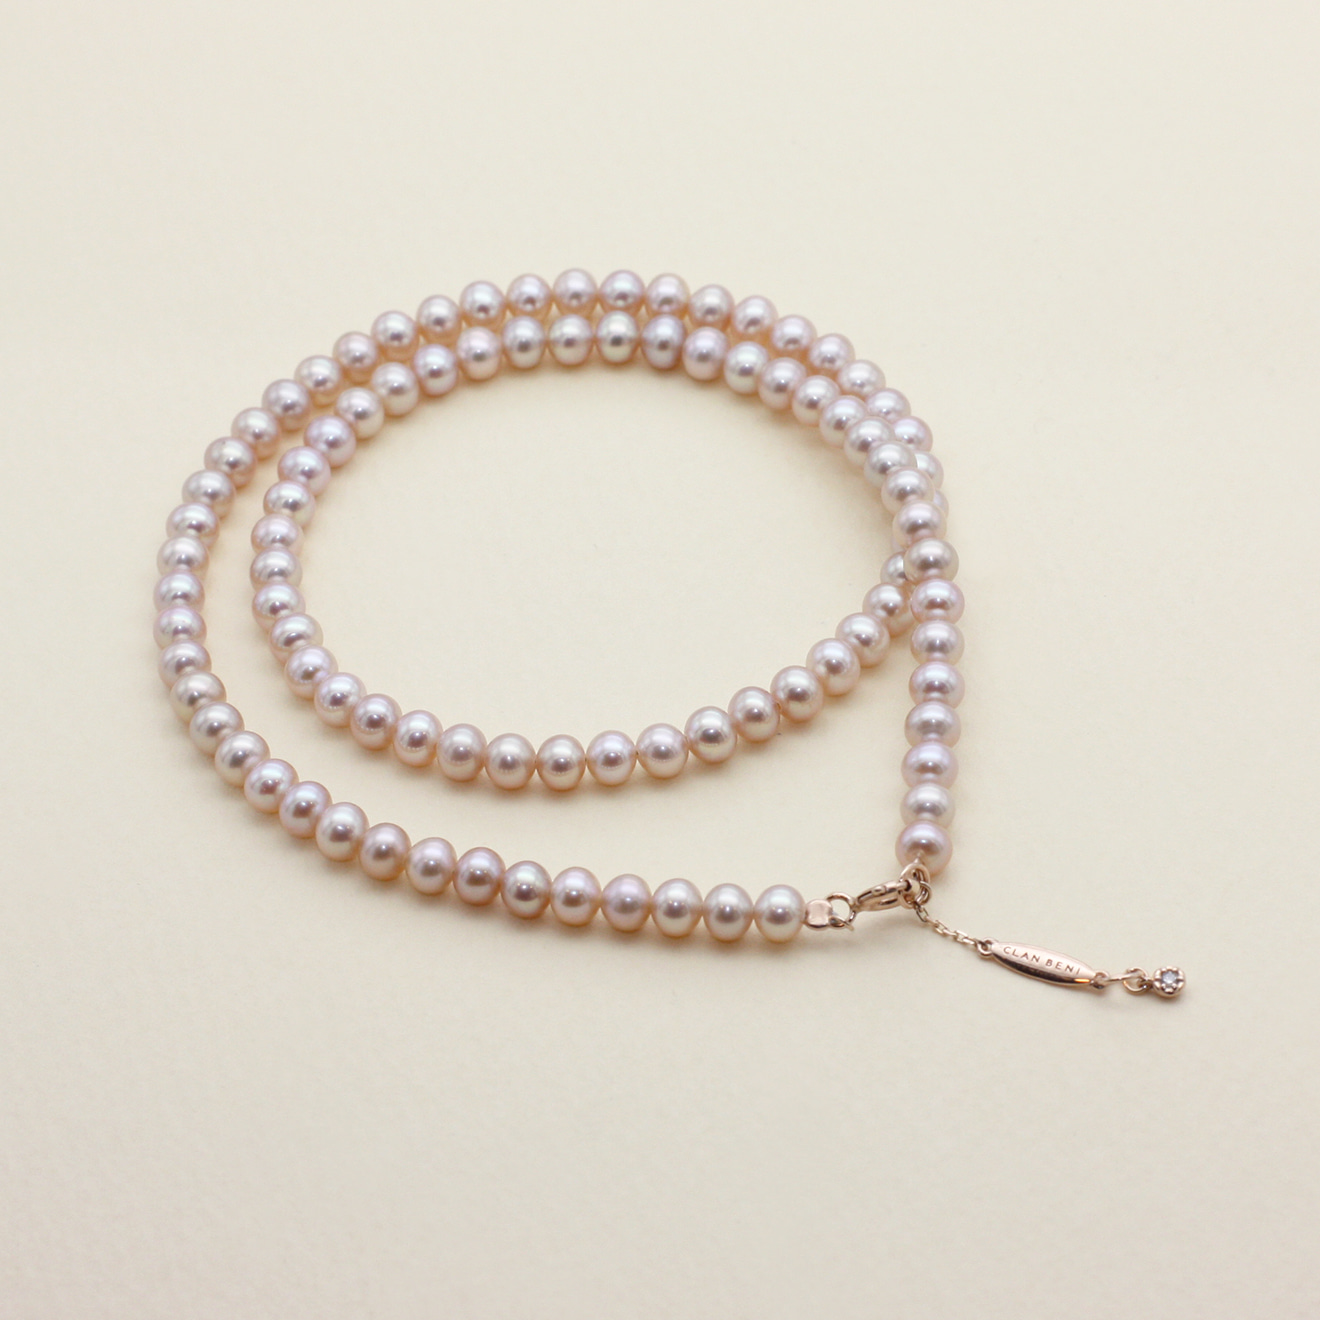 4.0 Round Pearl Strand Necklace